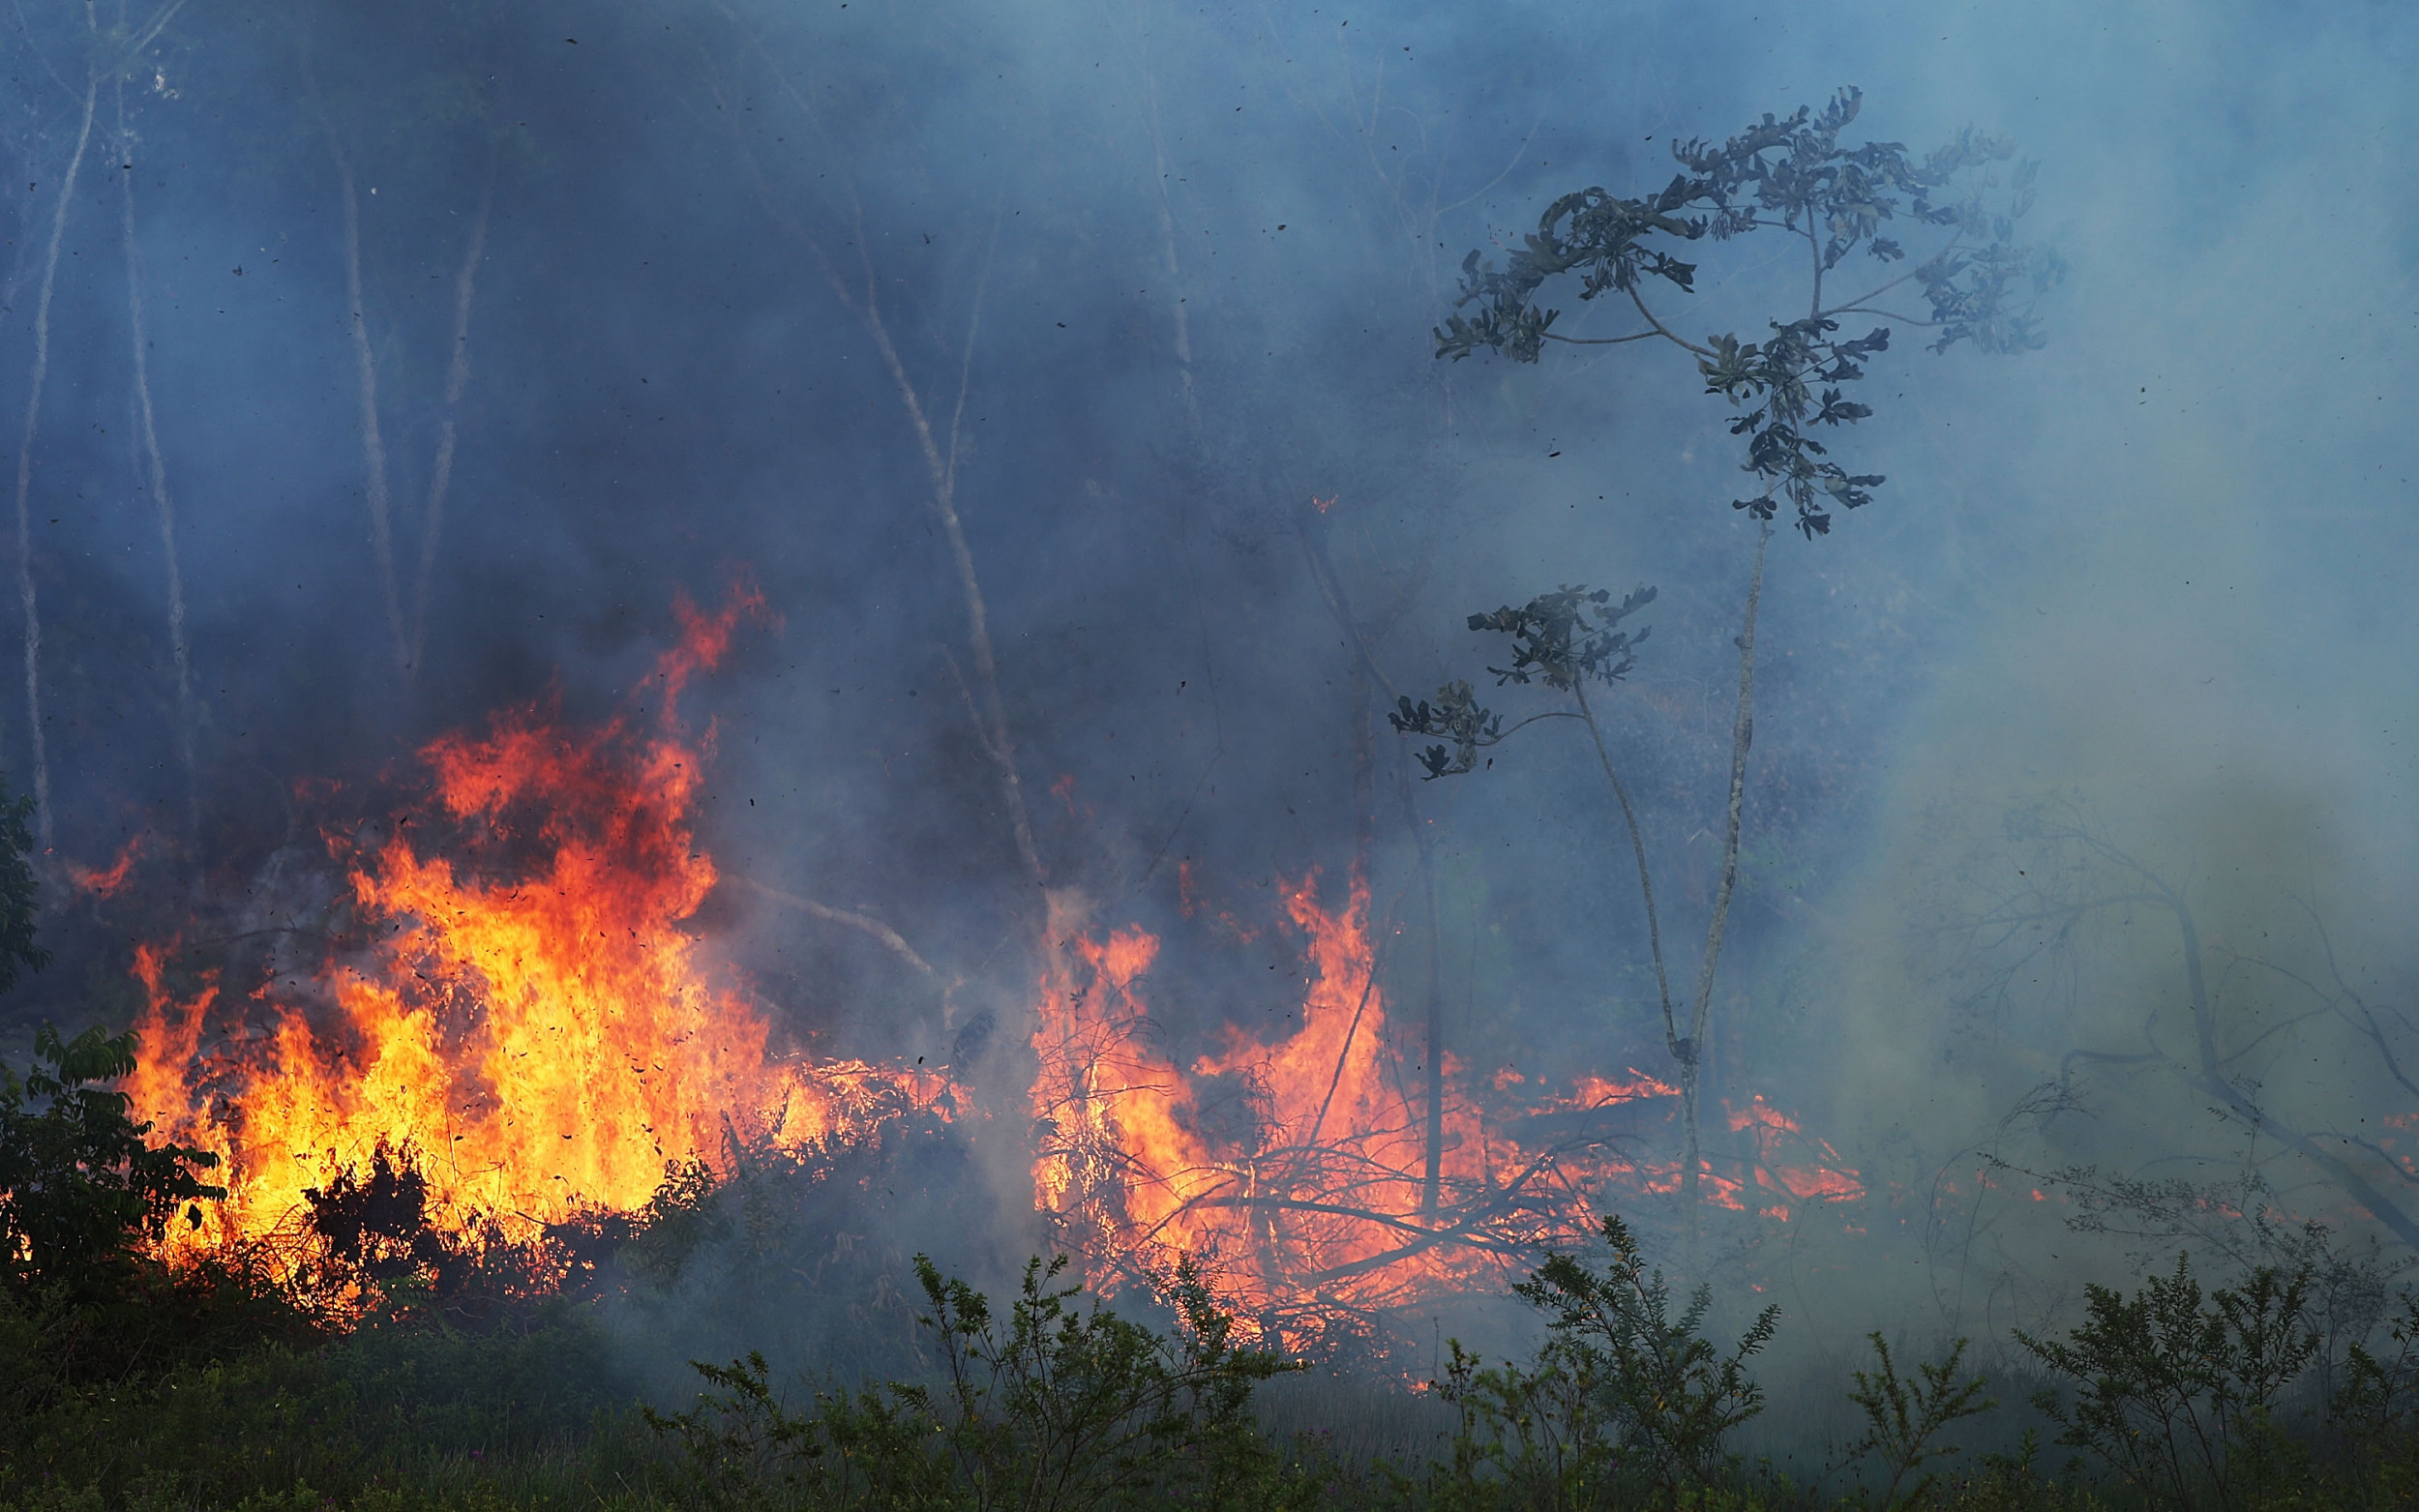 How Did The Amazon Rainforest Fires Start